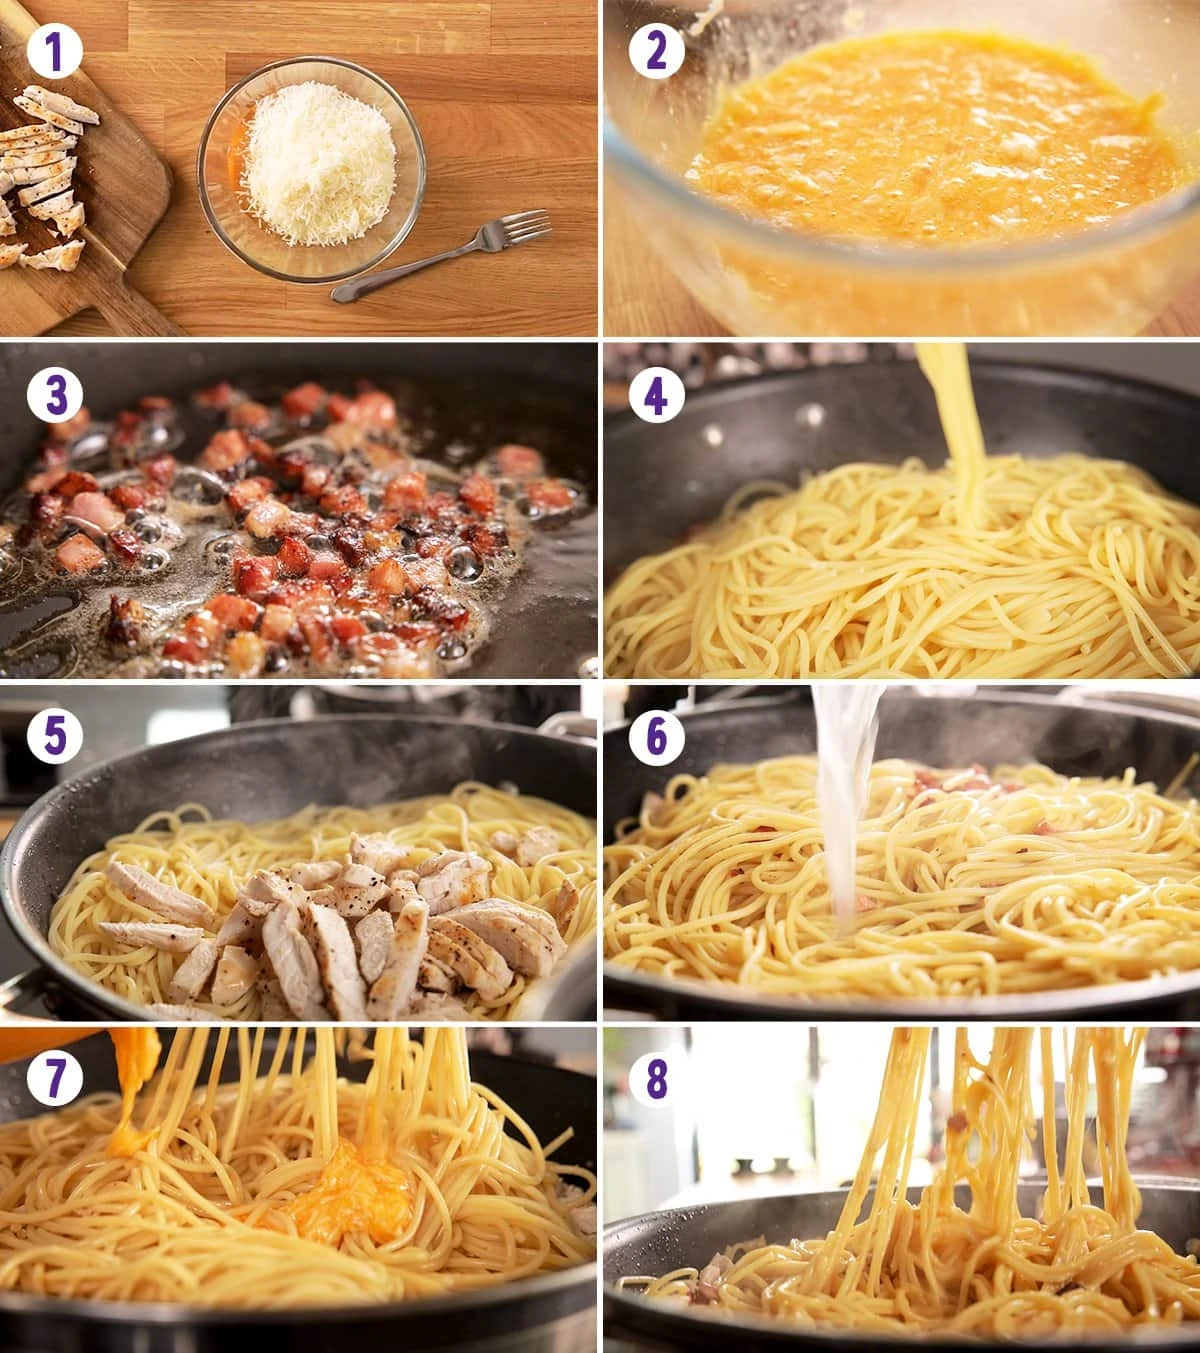 8 image collage showing how to make chicken carbonara